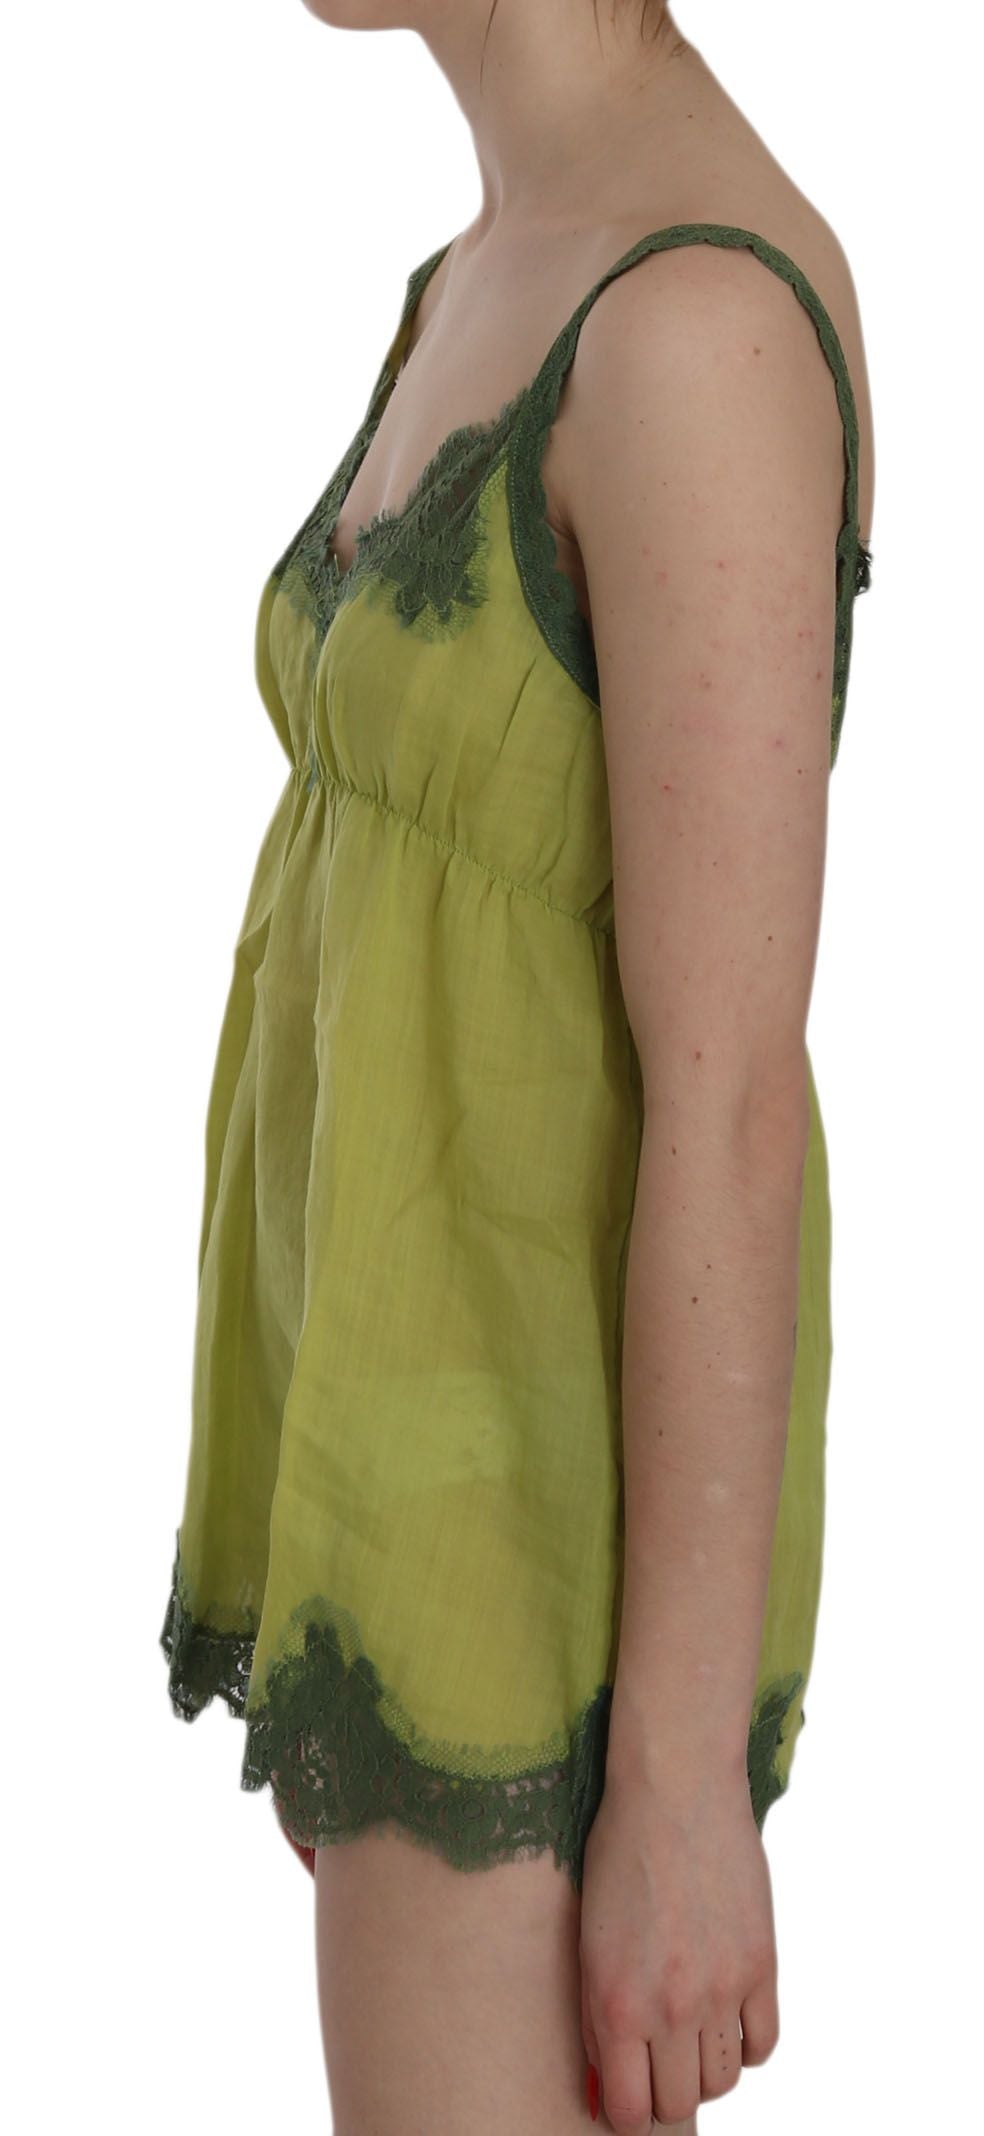 Green Lace Spaghetti Strap Tank Top Blouse - Designed by PINK MEMORIES Available to Buy at a Discounted Price on Moon Behind The Hill Online Designer Discount Store